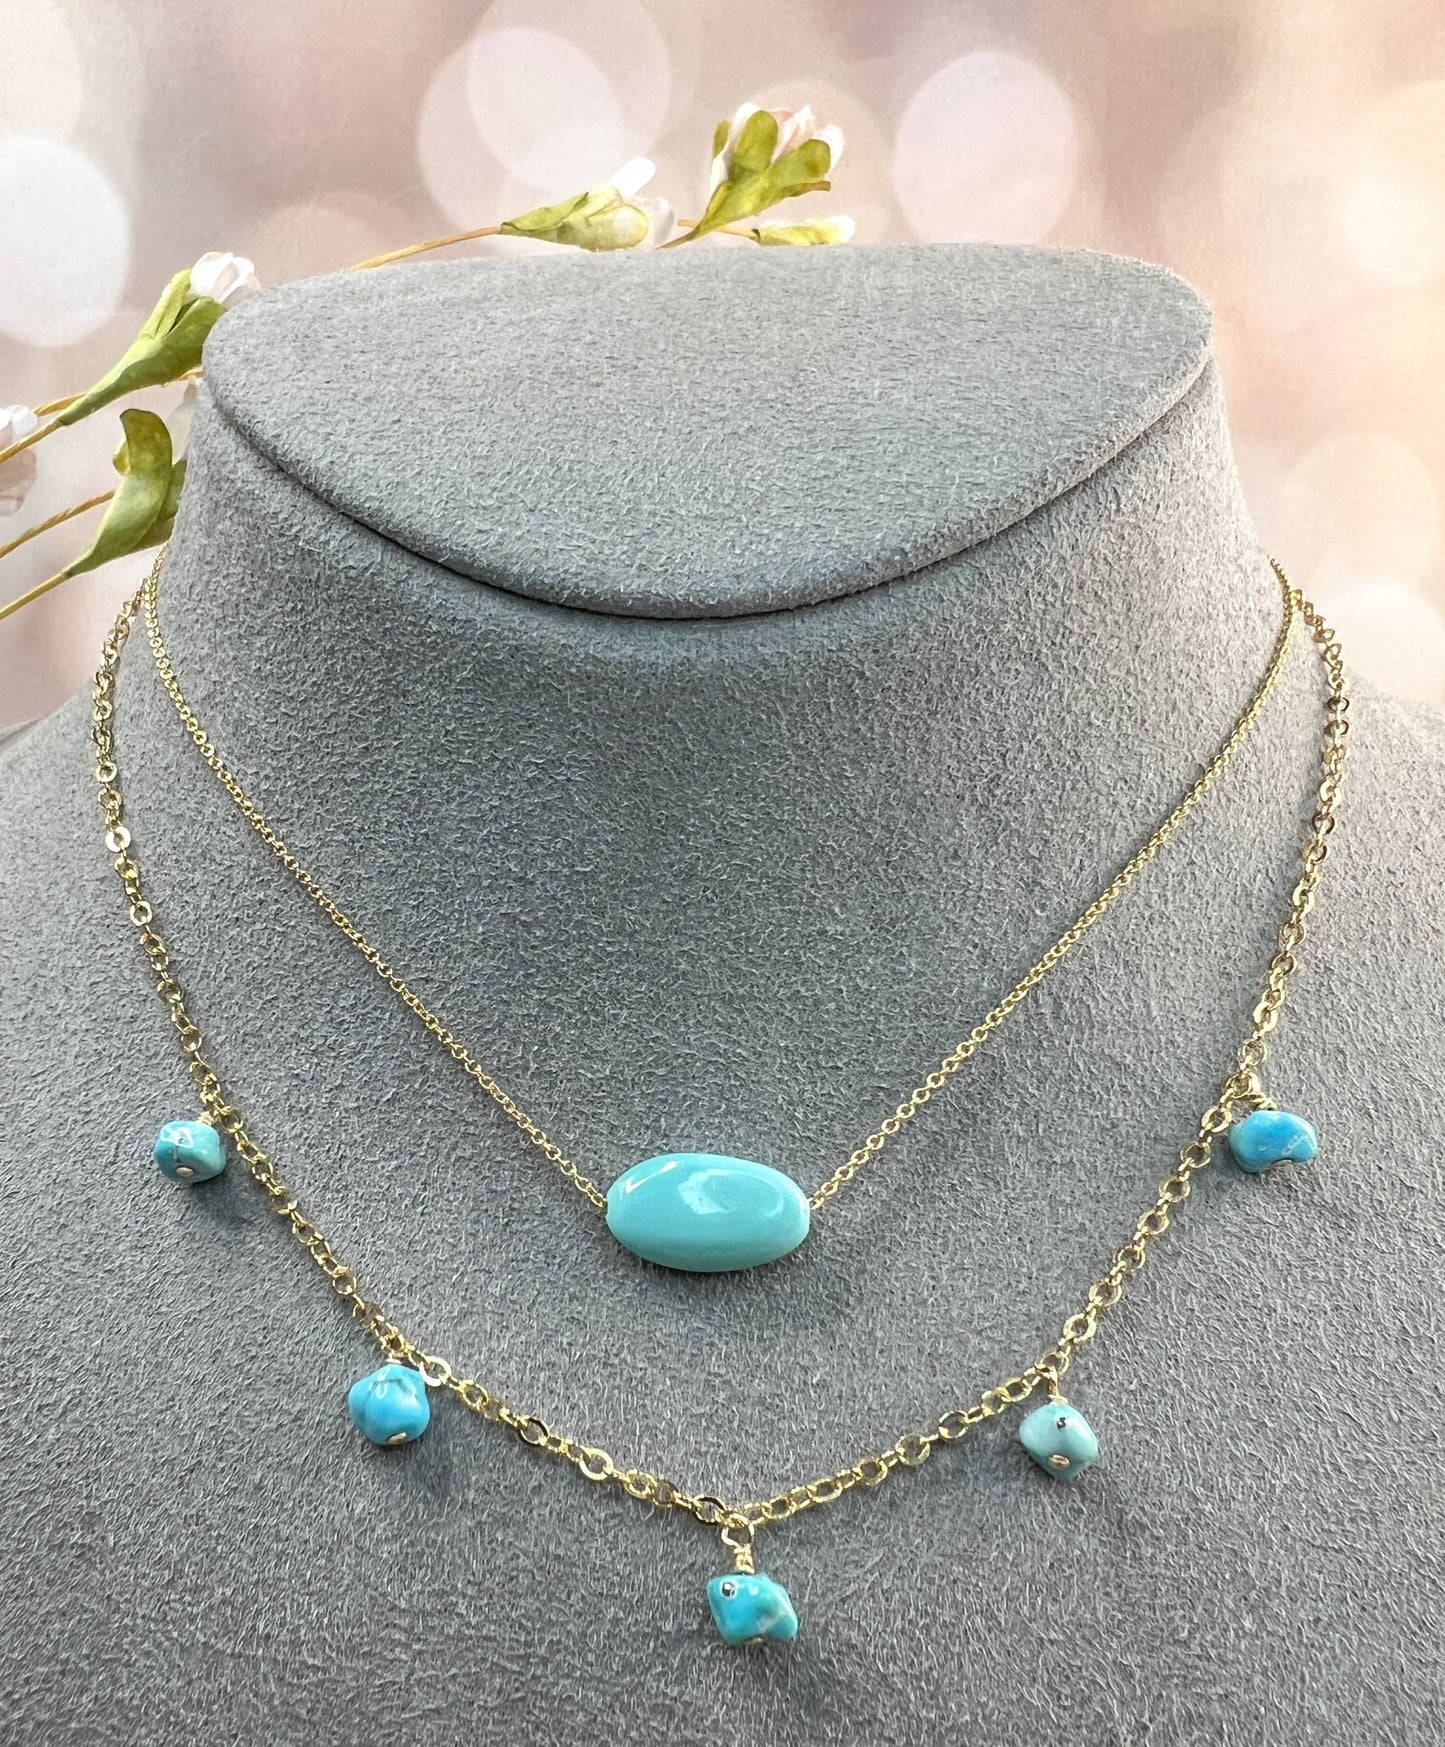 Sleeping Beauty Turquoise Nugget Slide Necklace